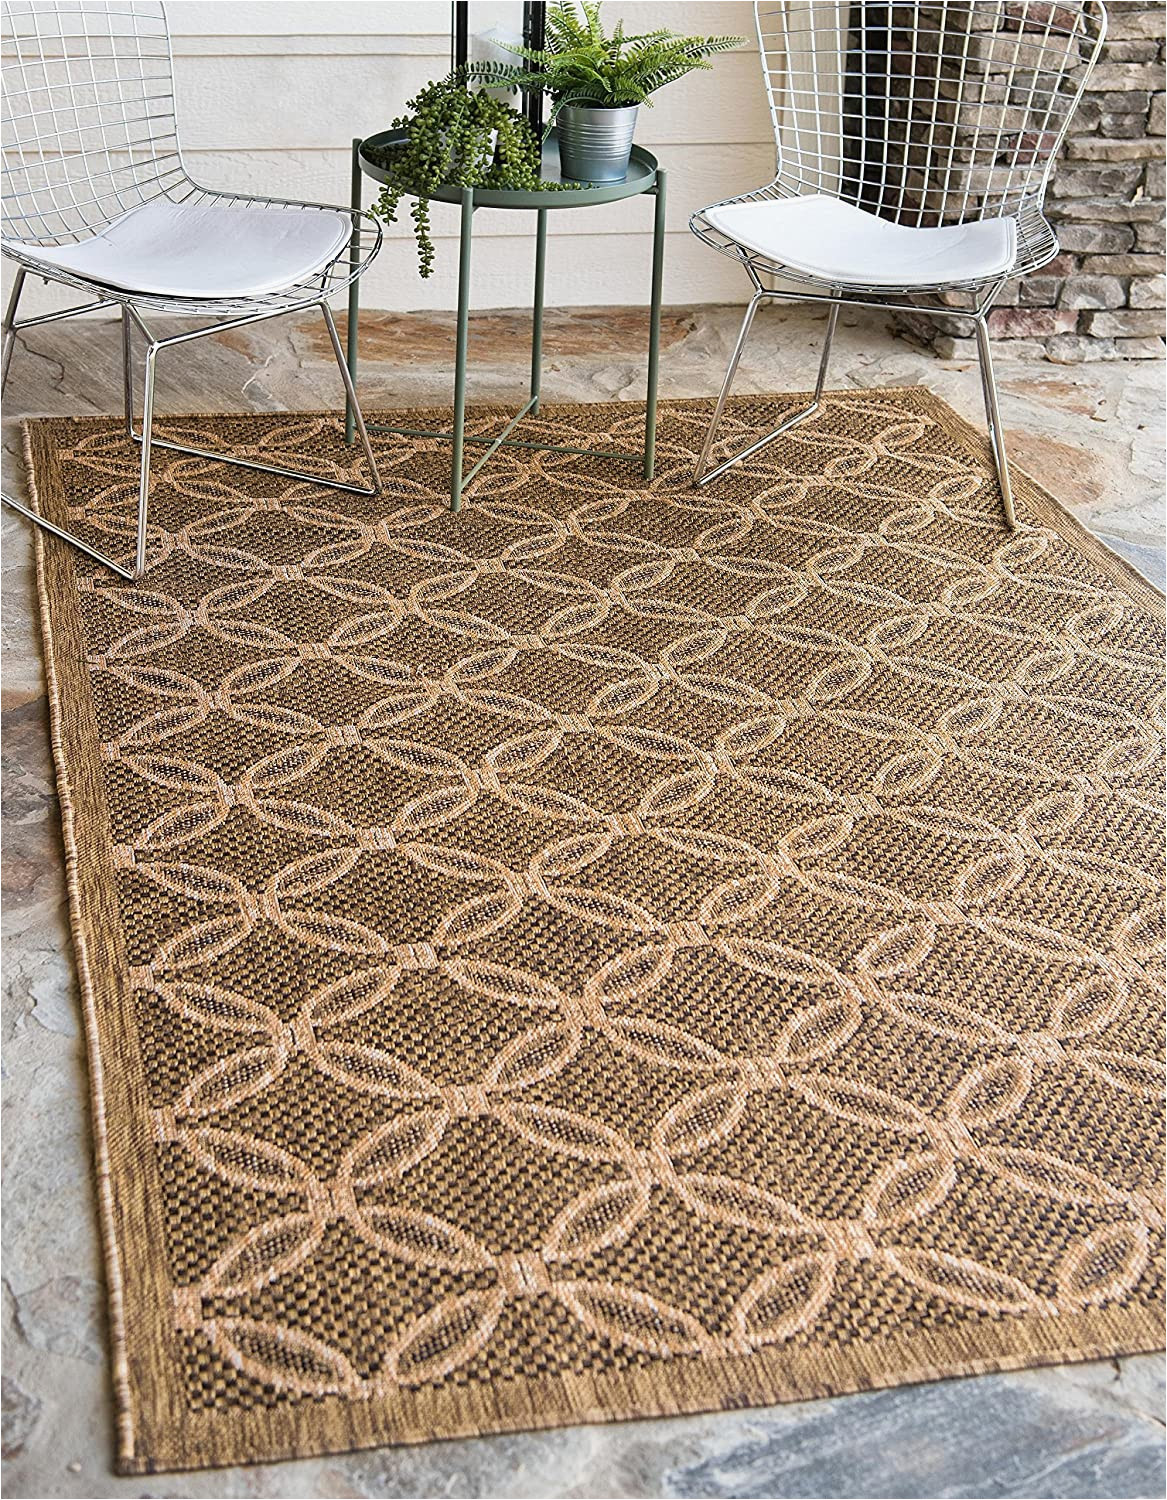 Bed Bath and Beyond Rugs 3×5 Unique Loom Outdoor Trellis Collection Geometric Border Transitional Indoor and Outdoor Flatweave Light Brown Cream area Rug 3 3 X 5 0